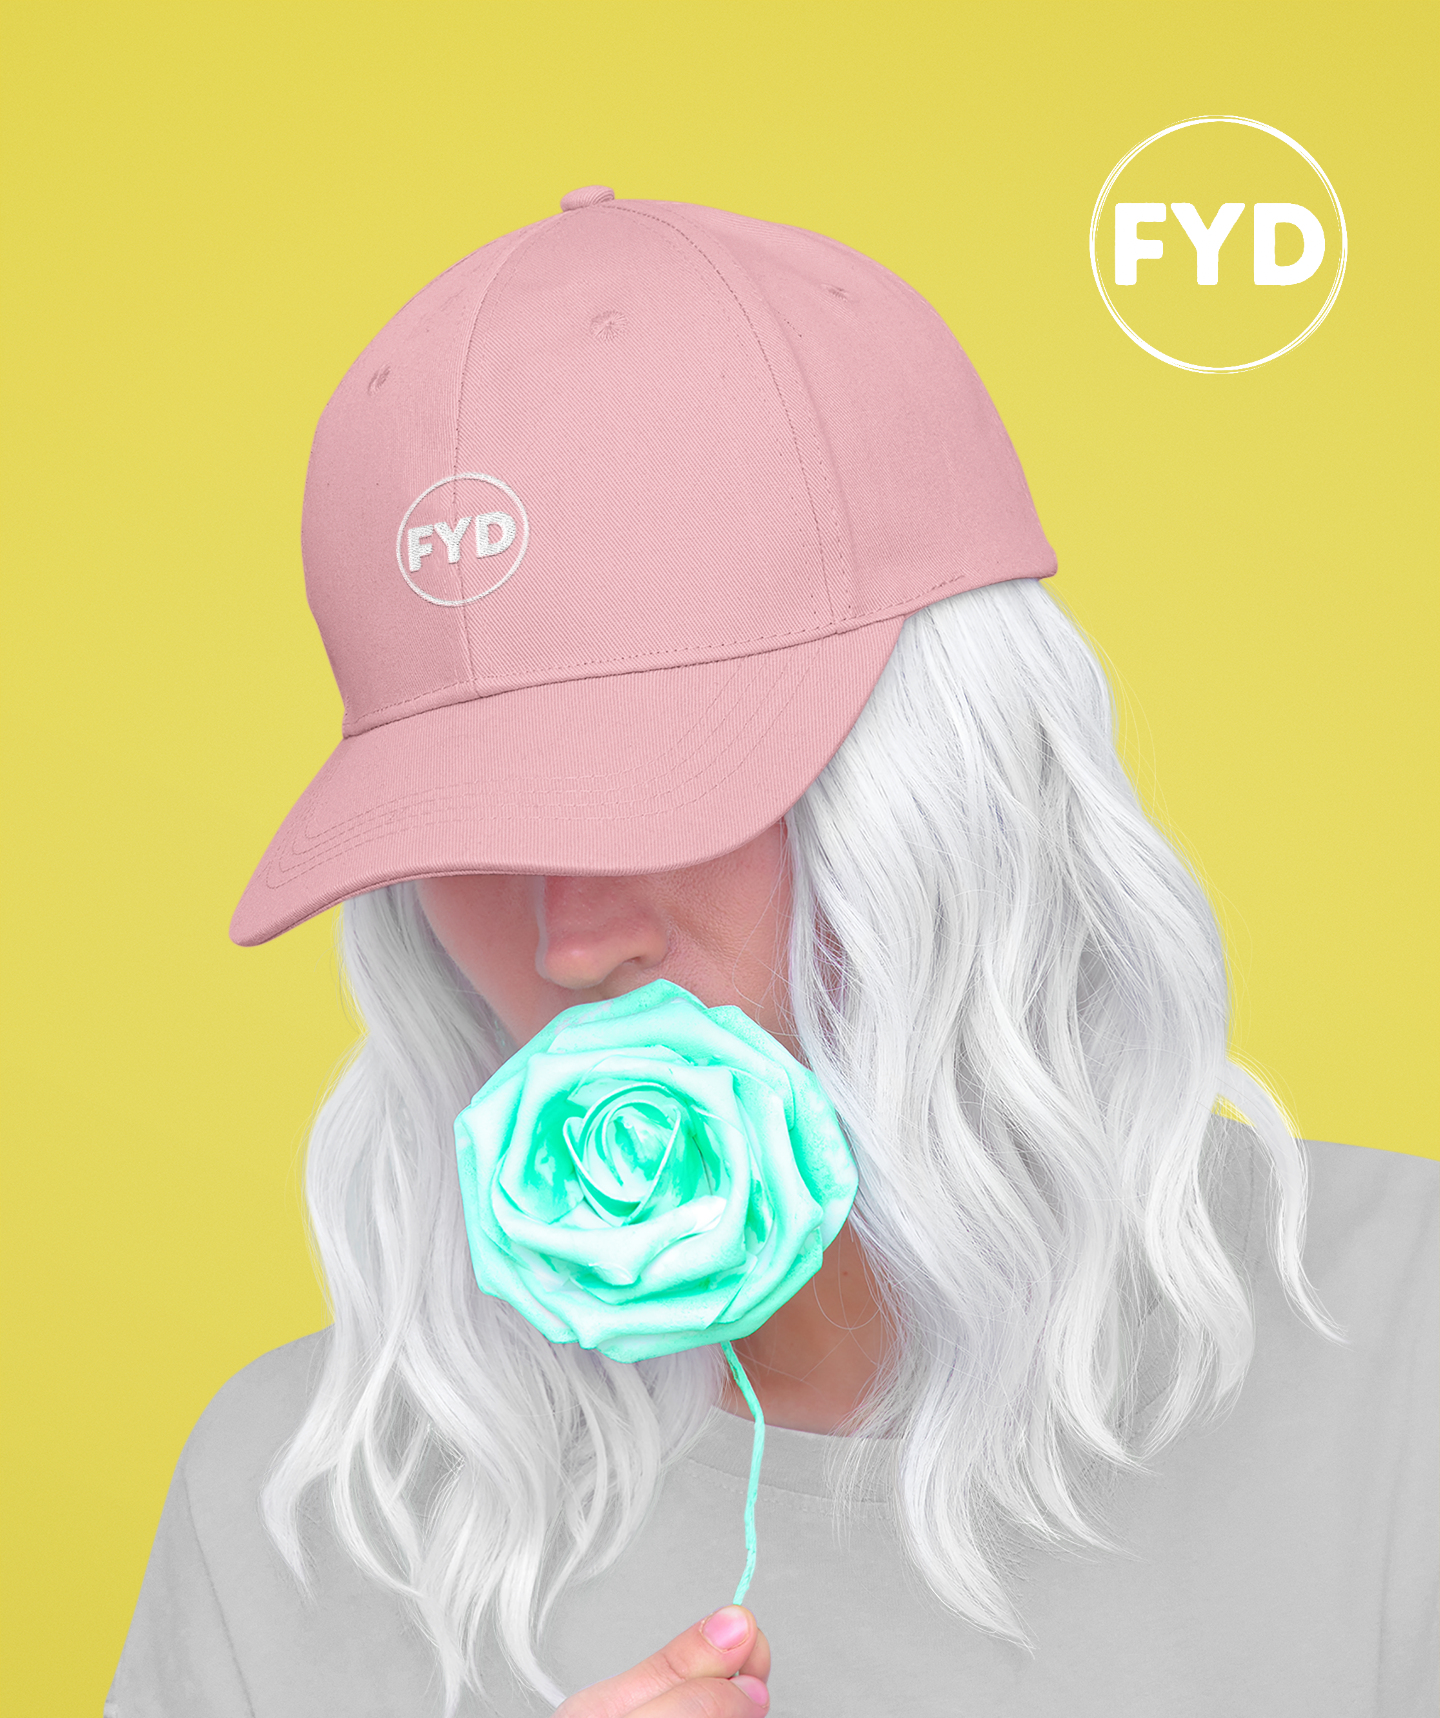 FYD Logo-Embroidered Baseball Cap in 8+ colors